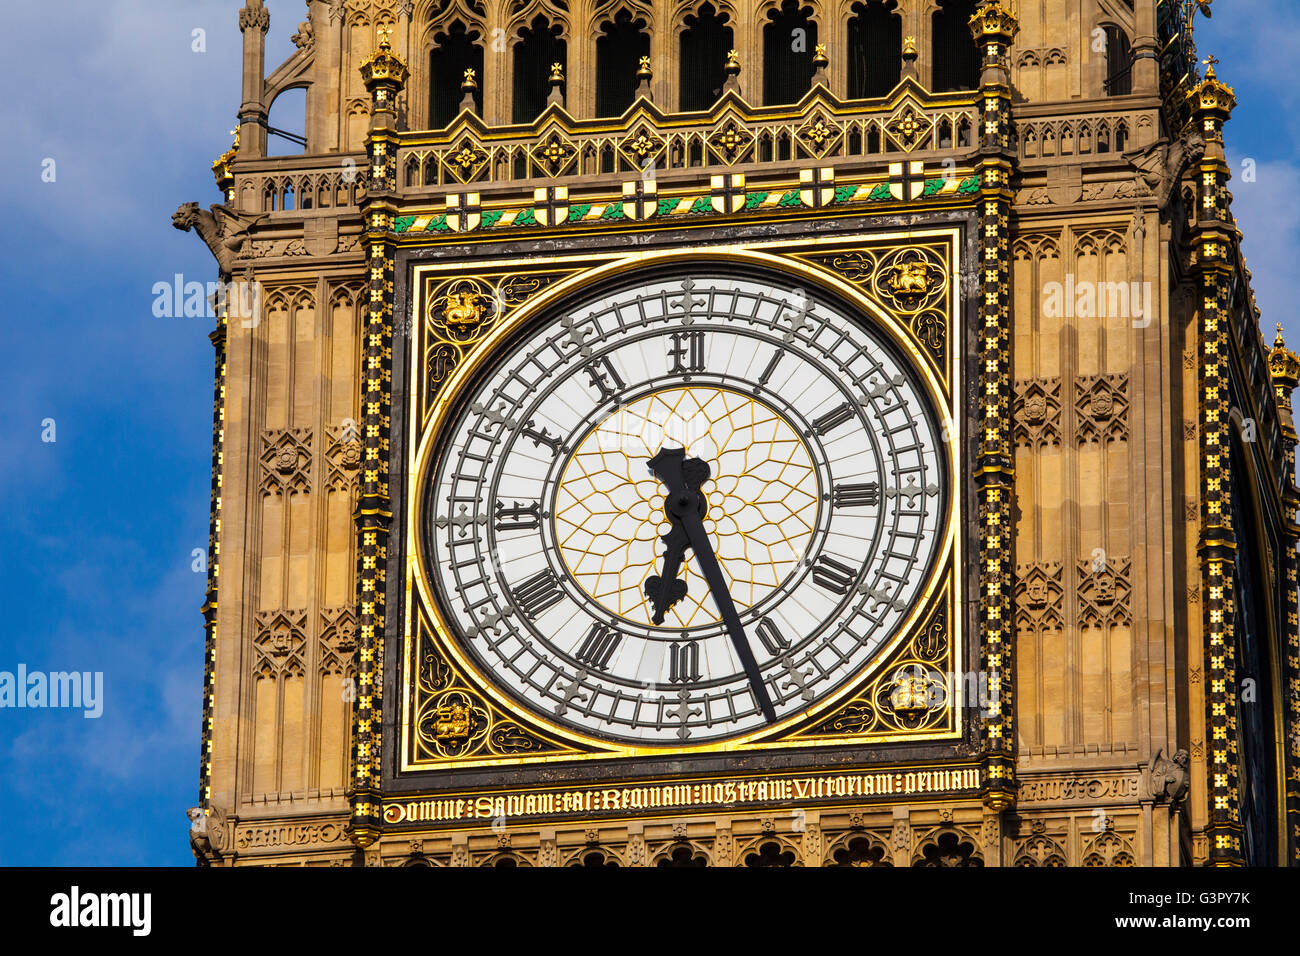 The clock face on the iconic Elizabeth Tower which is home to the historic bell named Big Ben. Stock Photo